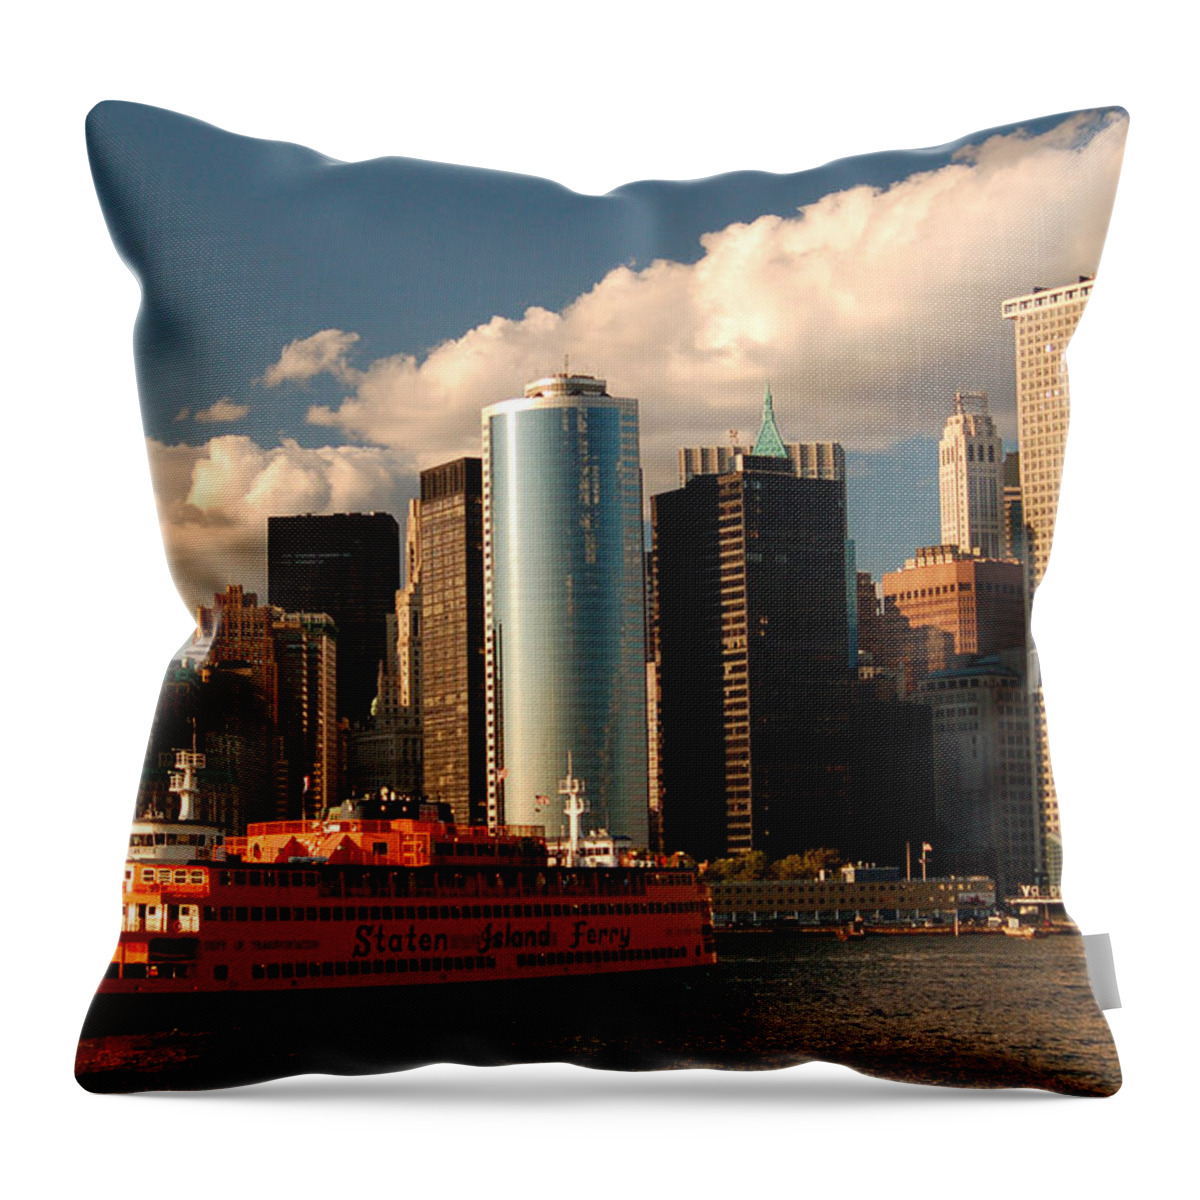 Staten Island Ferry Throw Pillow featuring the photograph Lower Manhattan by James Kirkikis